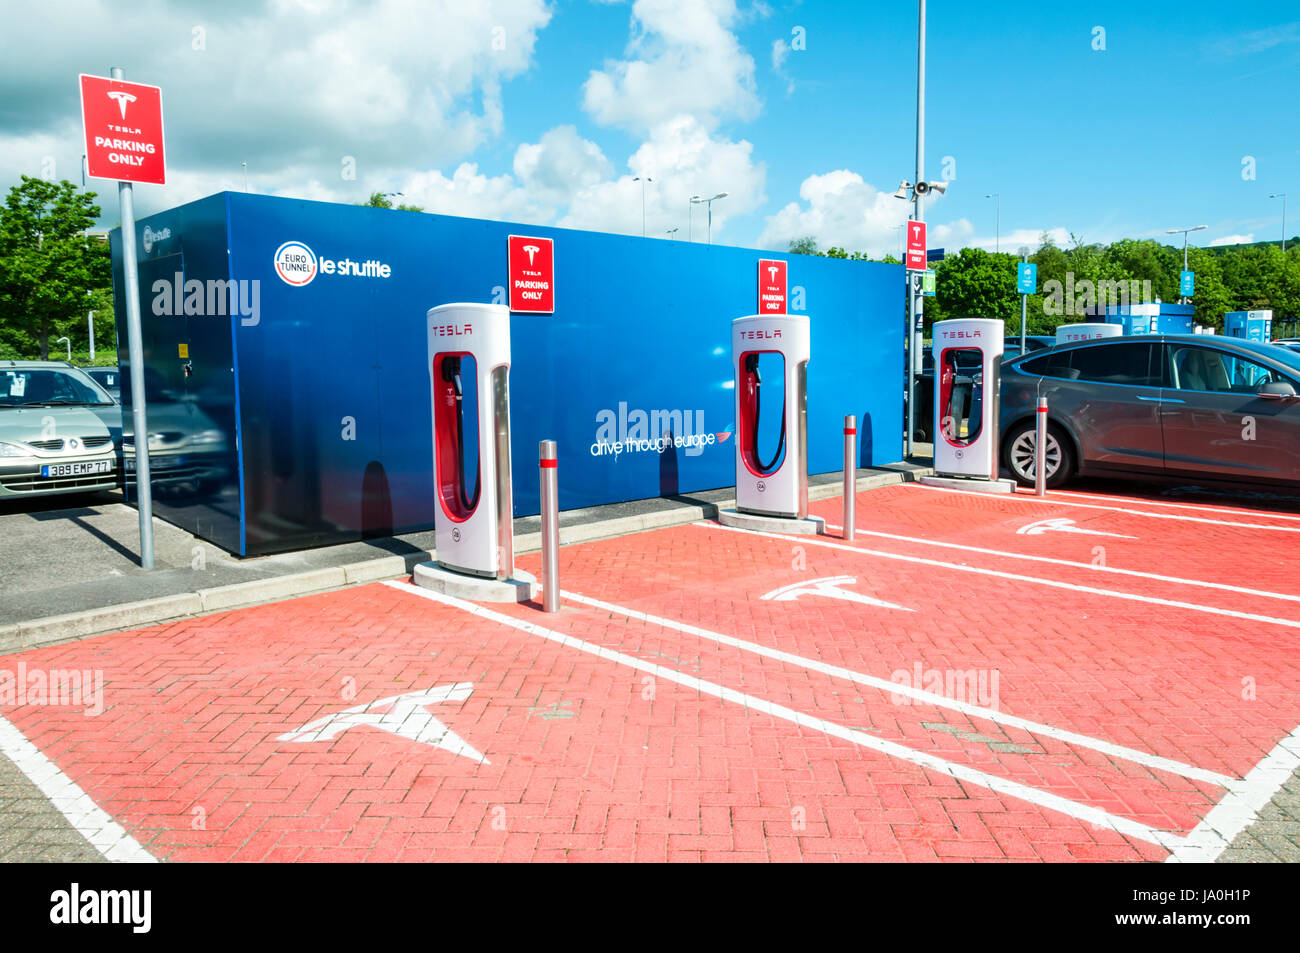 Electric car recharging point for Tesla electric cars at the British Eurotunnel terminal. Showing the Tesla name and logo. Stock Photo